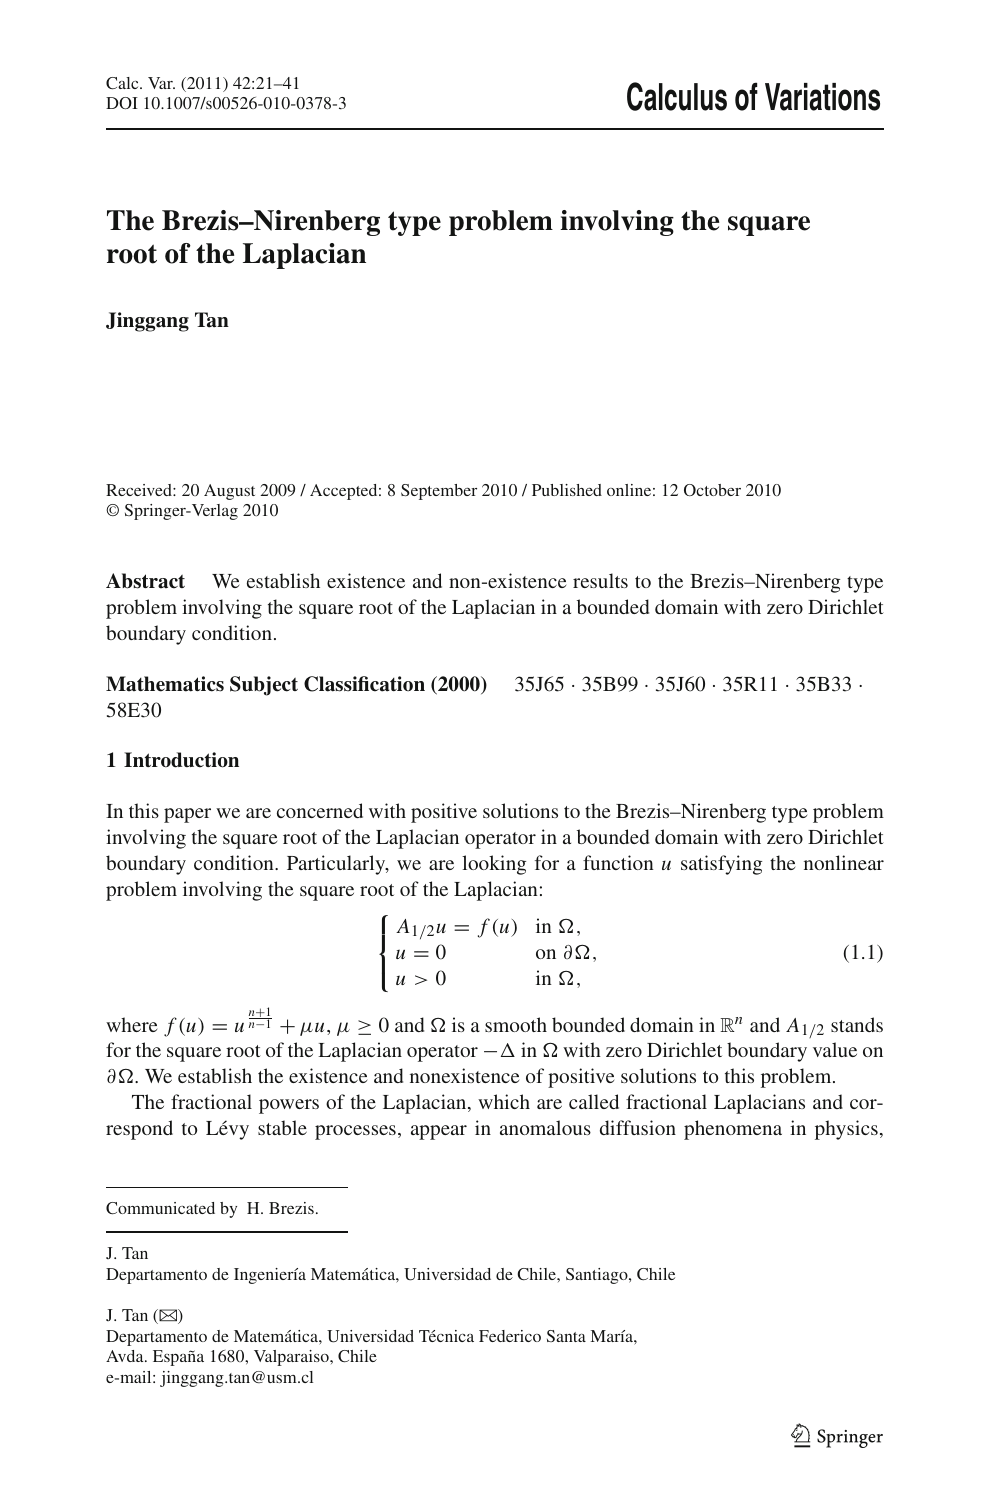 The Brezis Nirenberg Type Problem Involving The Square Root Of The Laplacian Topic Of Research Paper In Mathematics Download Scholarly Article Pdf And Read For Free On Cyberleninka Open Science Hub